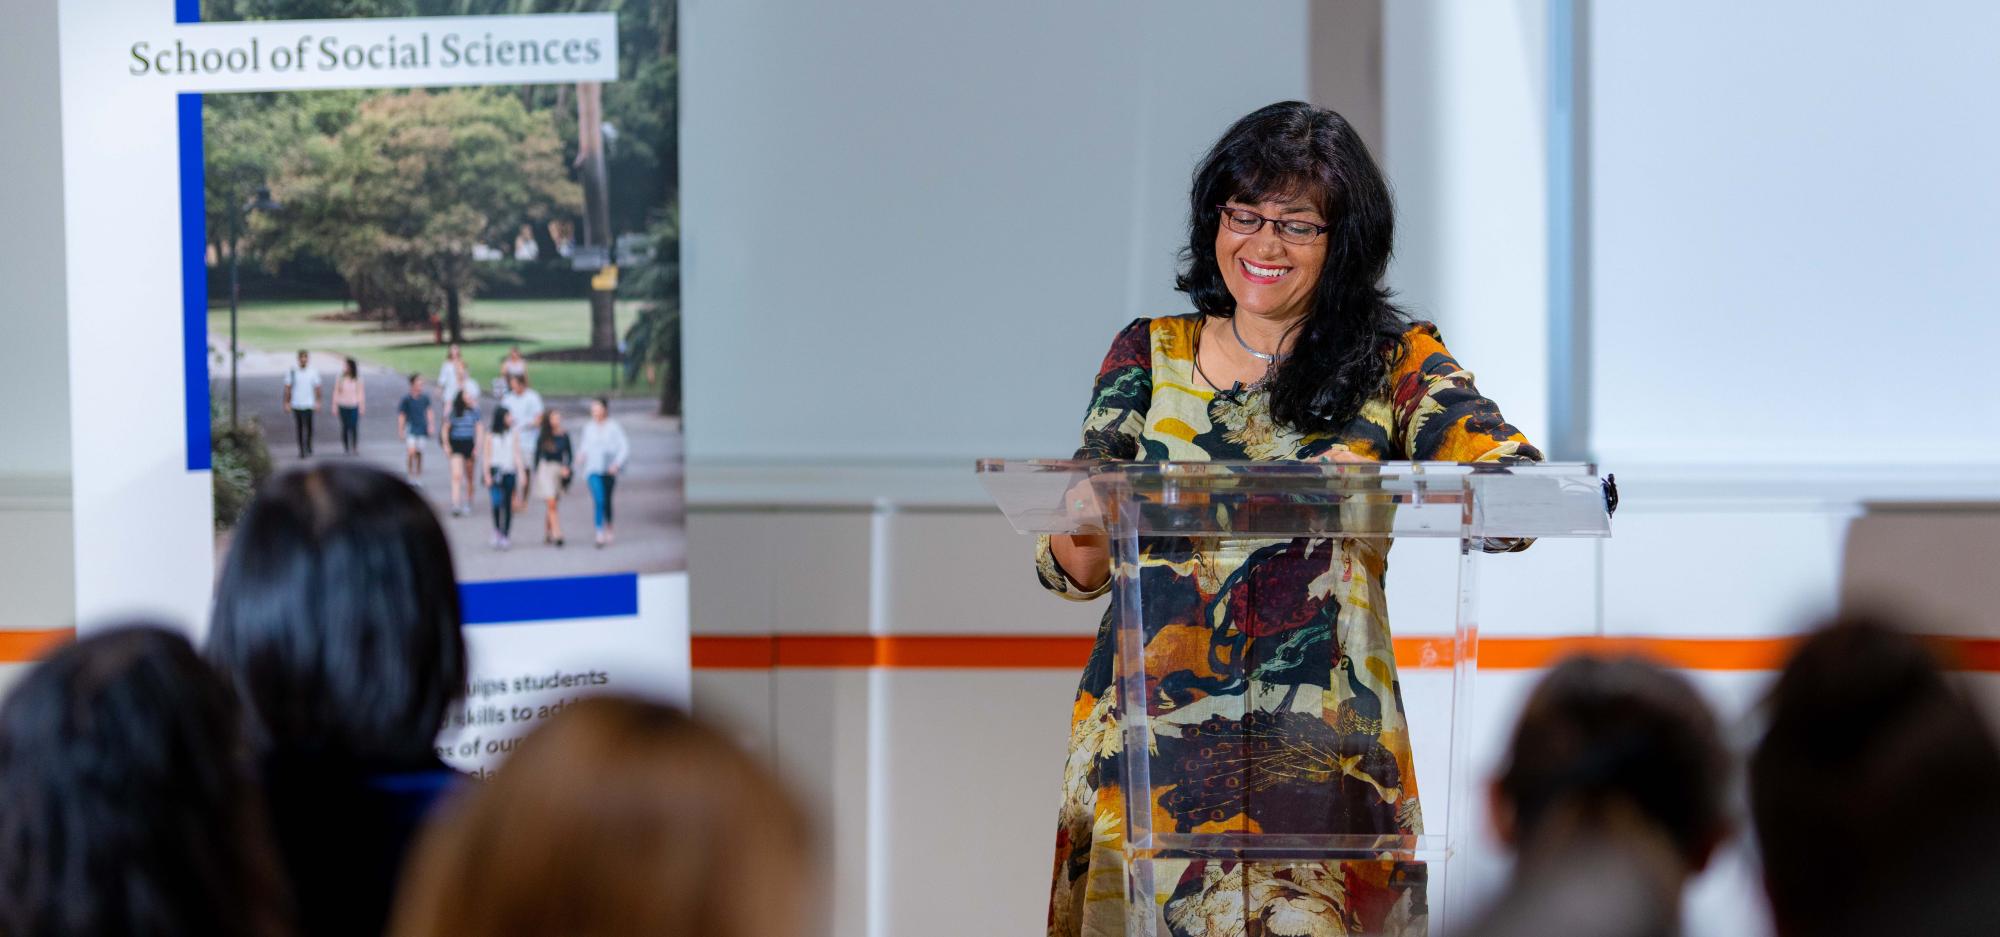 Pilar stands at a lectern in front of a UWA banner in a white conference room wearing a vivid autumnal patterned dress with her long black hair over her shoulder. She smiles as though in mid-sentence while she presents to a room of people.